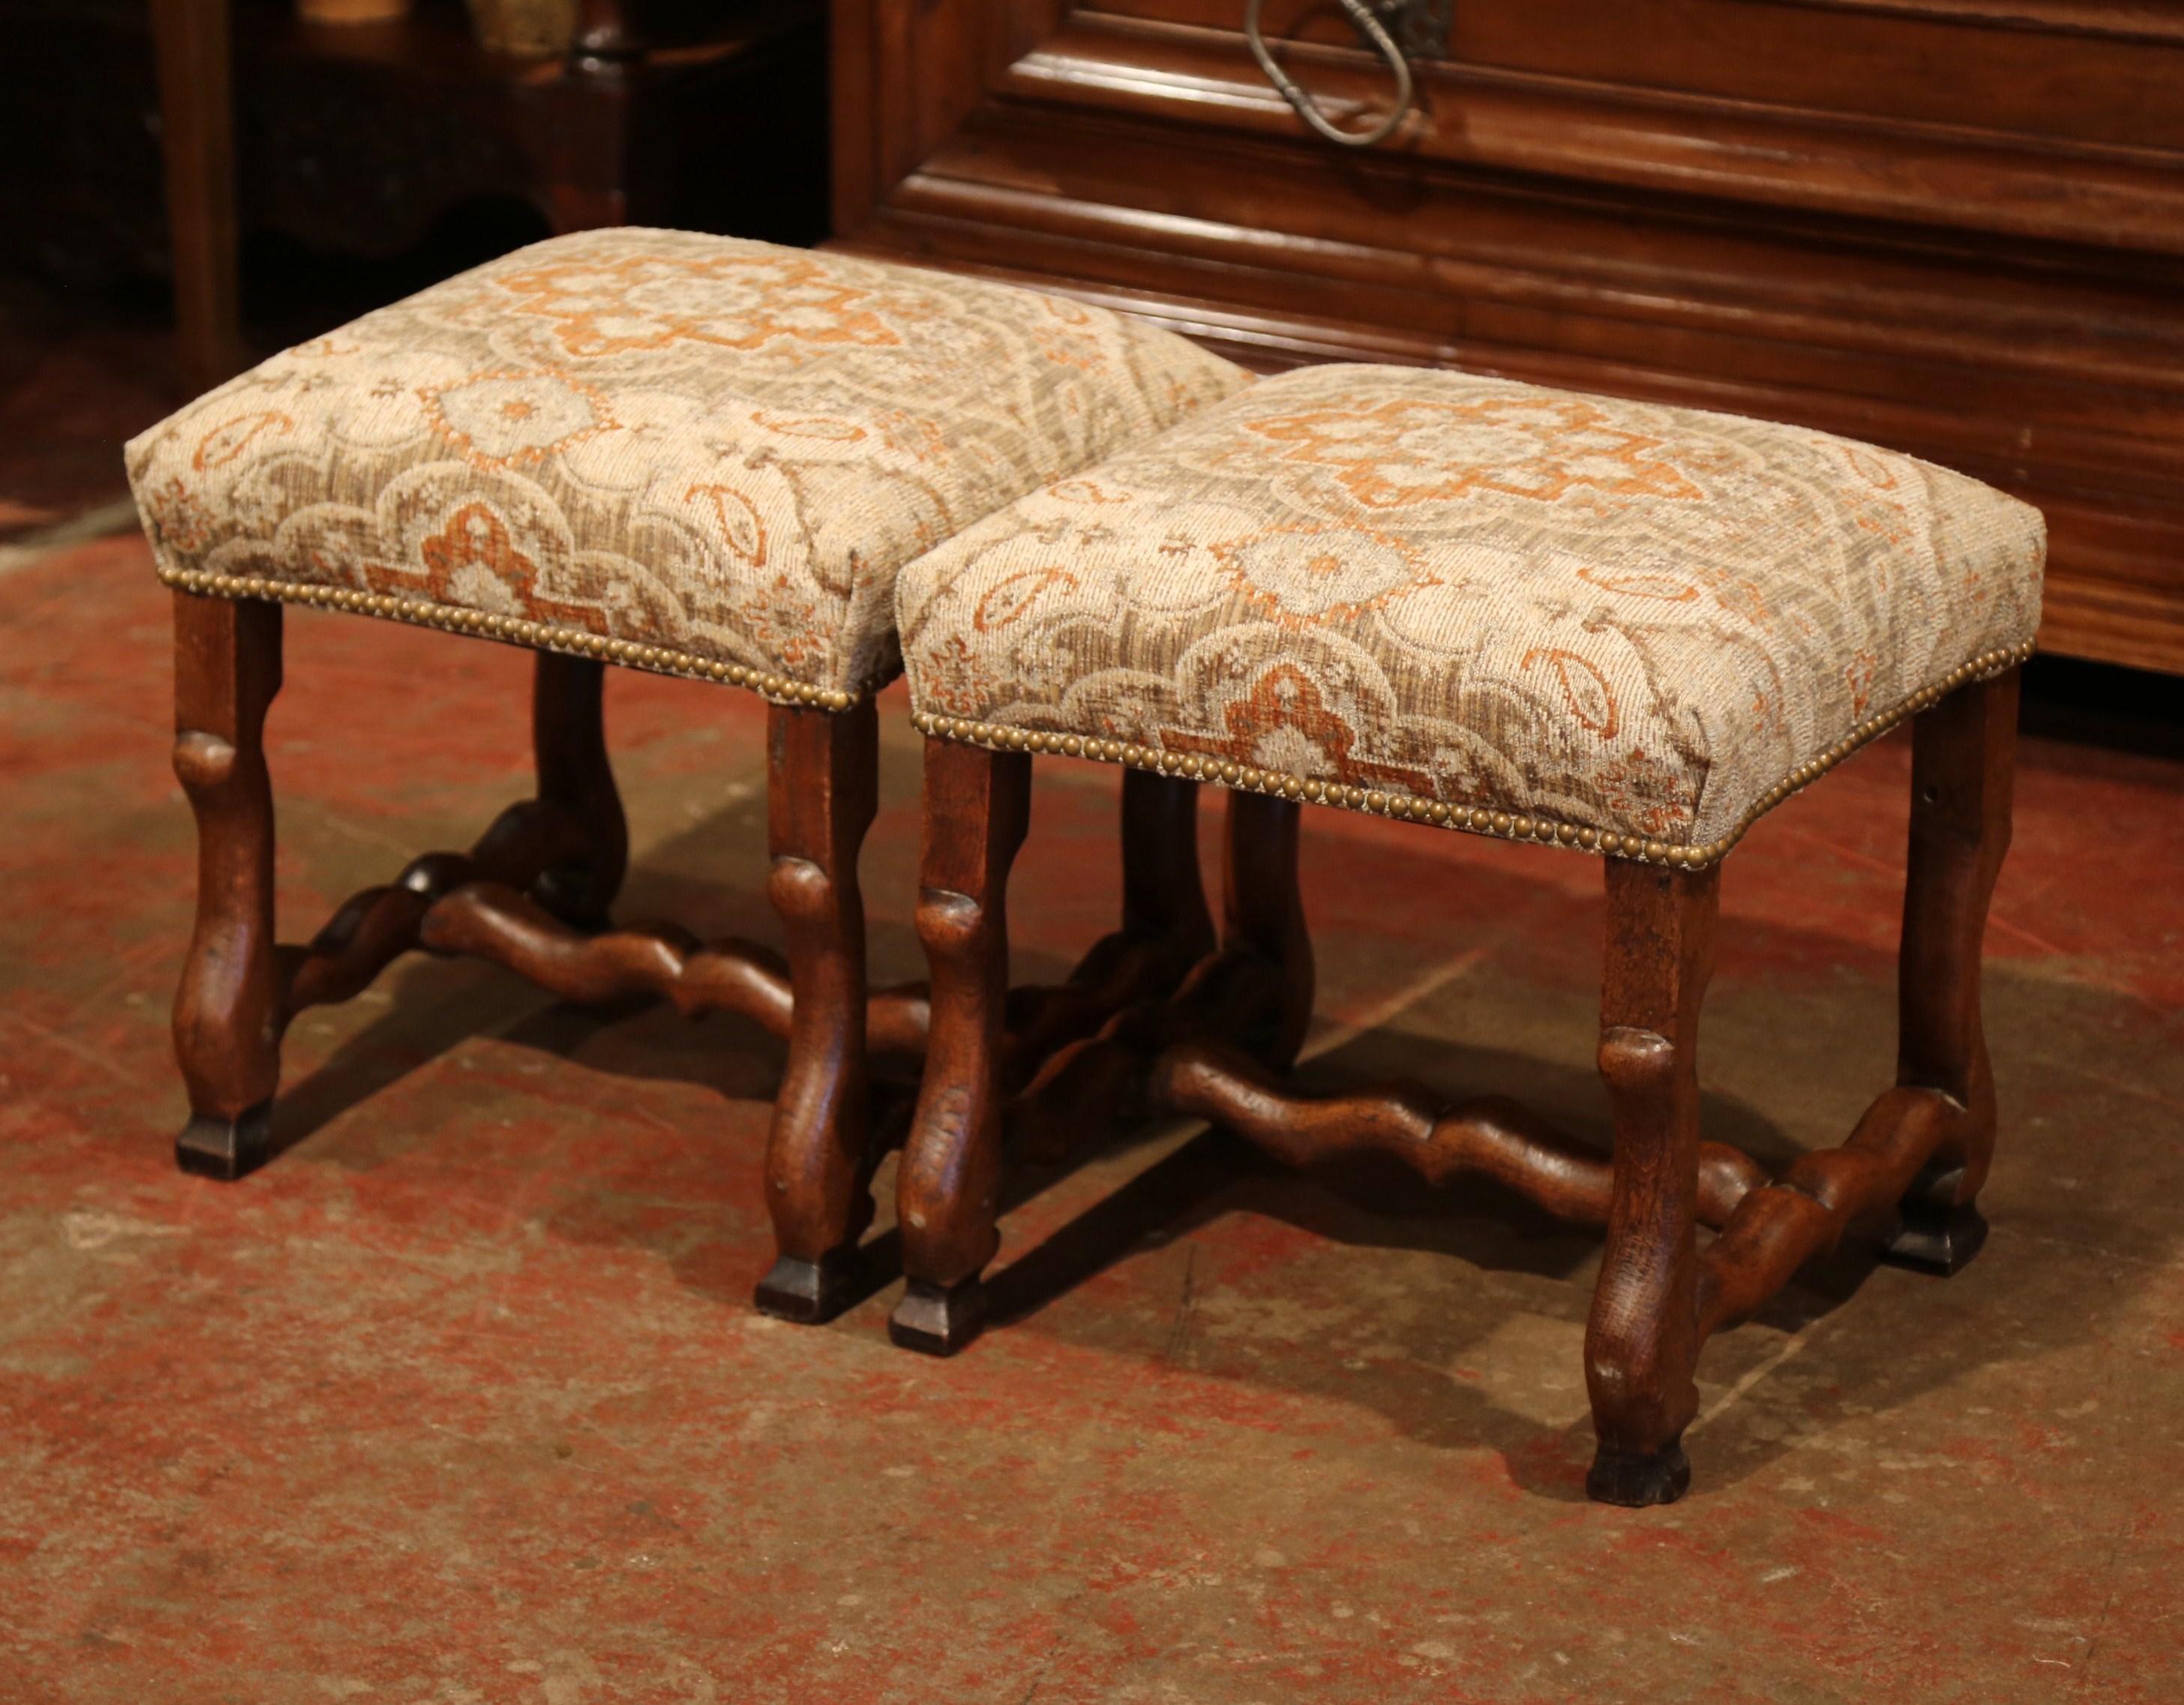 These elegant antique stools were crafted in Southern France, circa 1880. The fruitwood pieces feature fine, hand-carved scrolled sheep bone legs with a decorative curved stretcher. The 